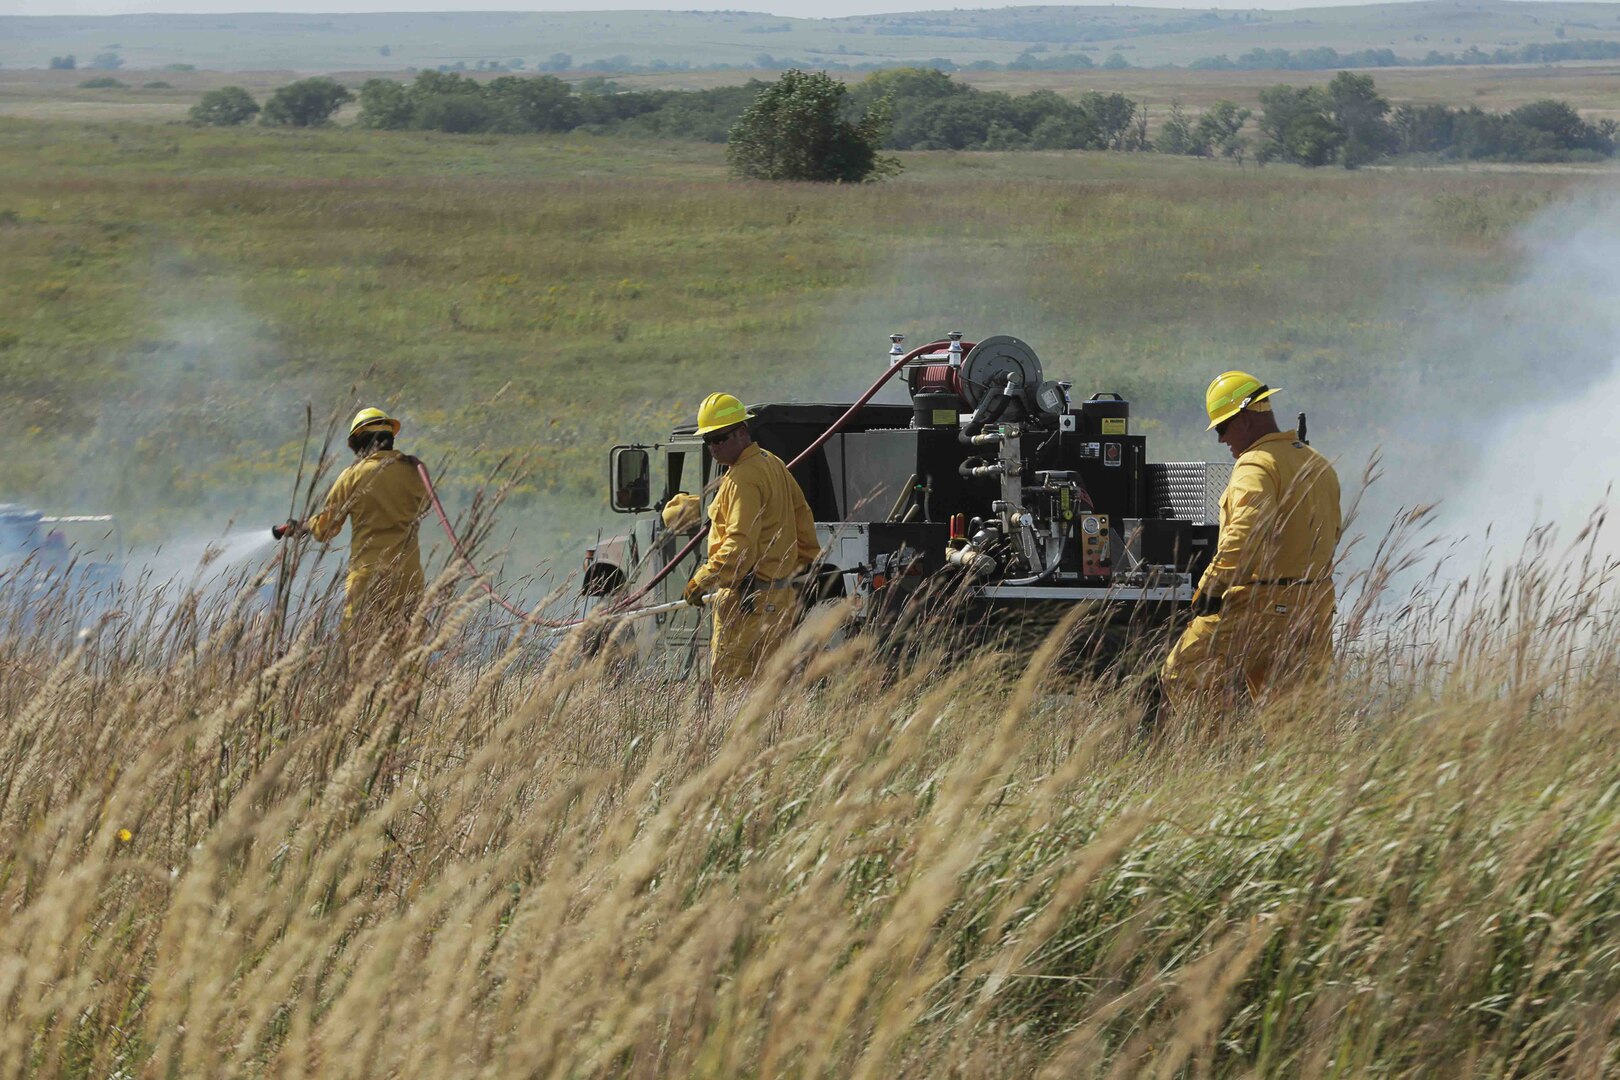 A group of Soldiers and Airmen from the Kansas National Guard spray flames with water from a High Mobility Multipurpose Wheeled Vehicle (HMMWV) during an integrated exercise with civilian fire departments at the Smokey Hill Range in Salina, Kansas, Sept. 19, 2019.